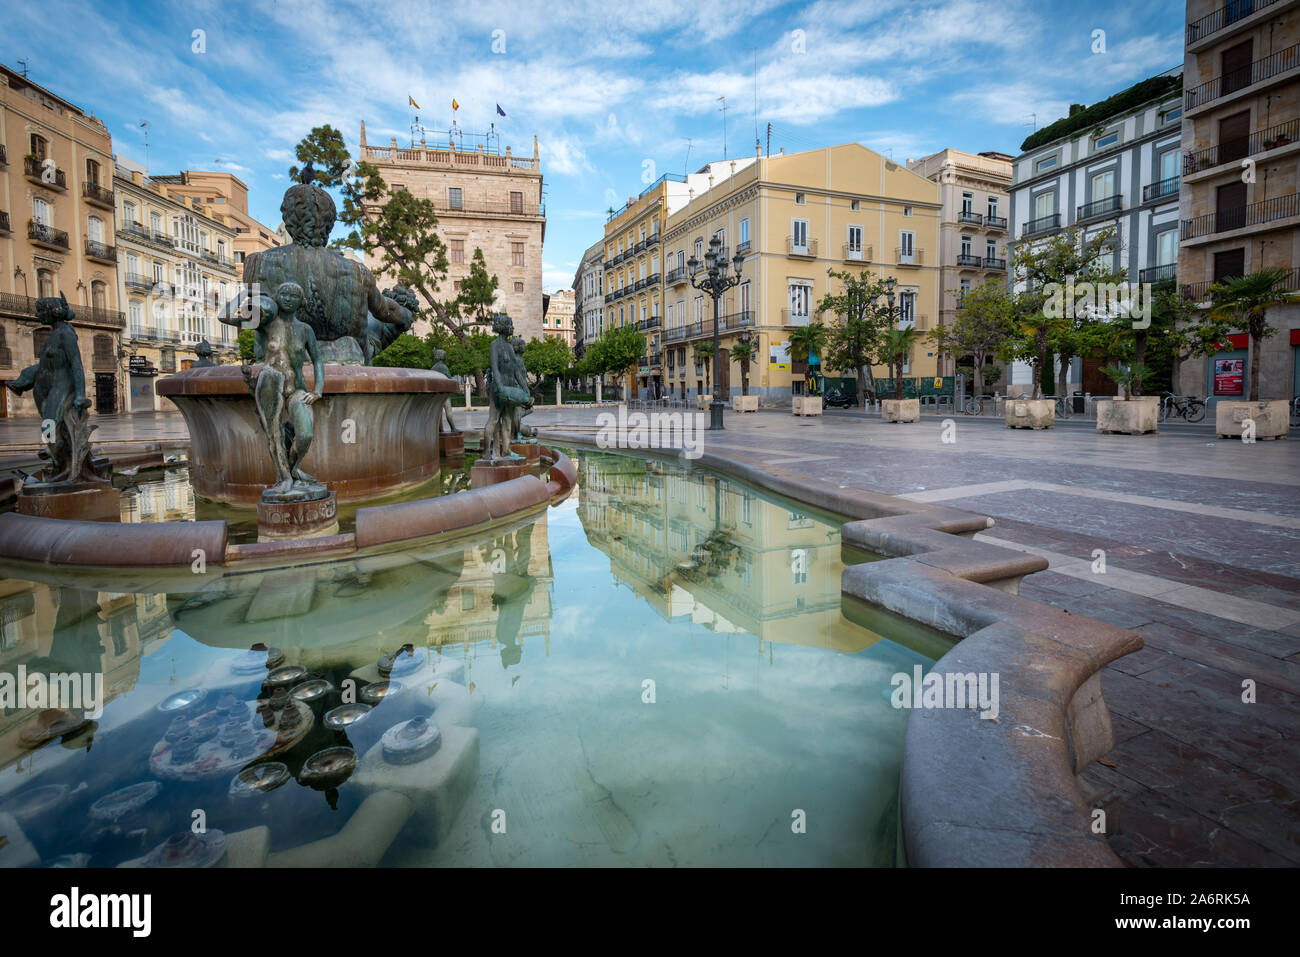 Turia Fountain Valencia, Spain. This famous fountain is located in the ...